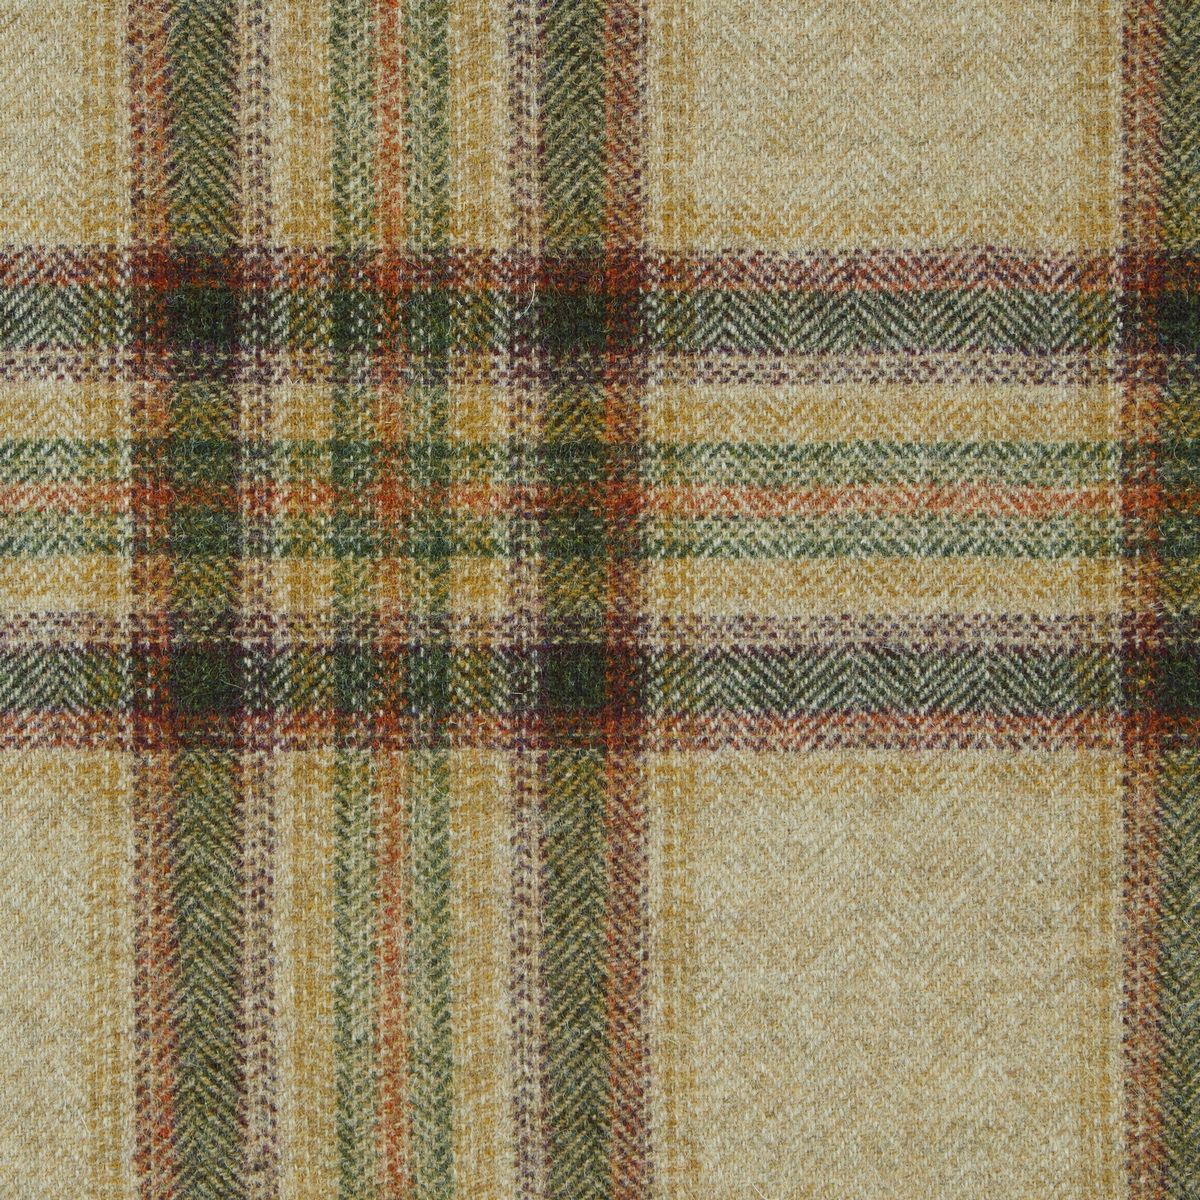 Wentworth Check Natural Olive Fabric by Abraham Moon